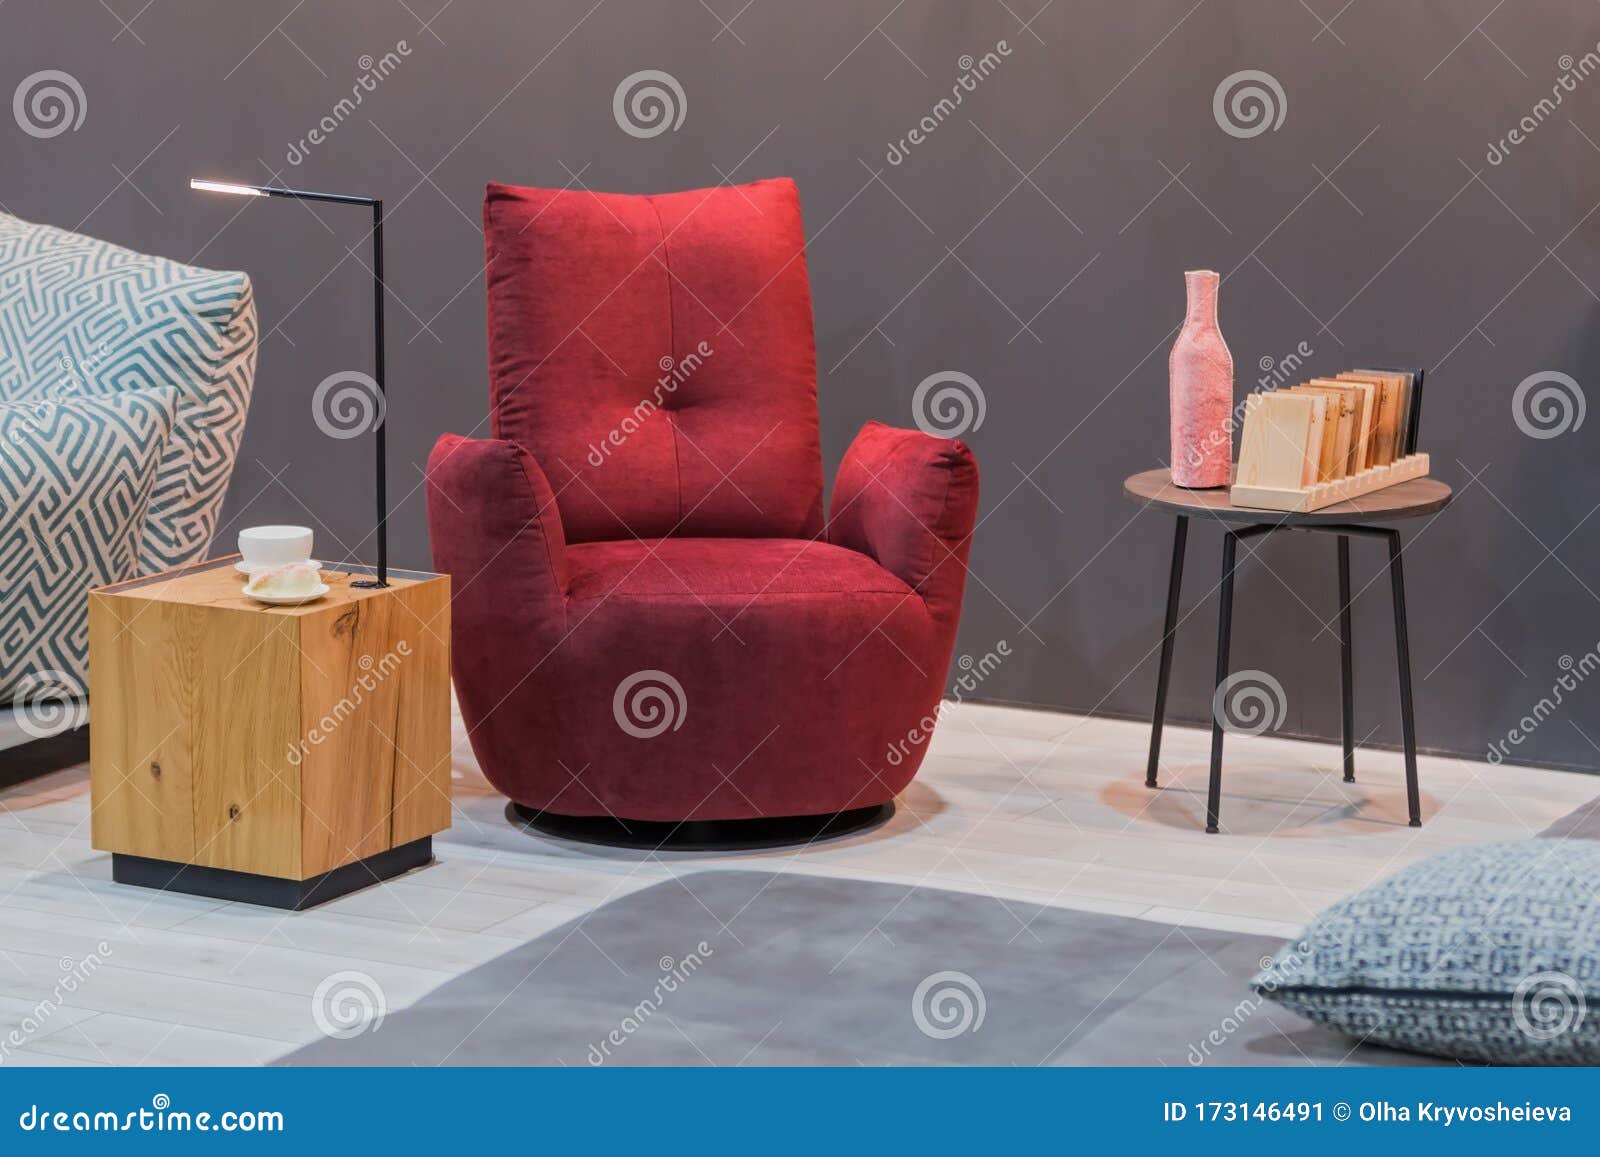 Red Armchair Wooden Table With Lamp Small Coffee Table In The Interior Stock Image Image Of Empty Interior 173146491